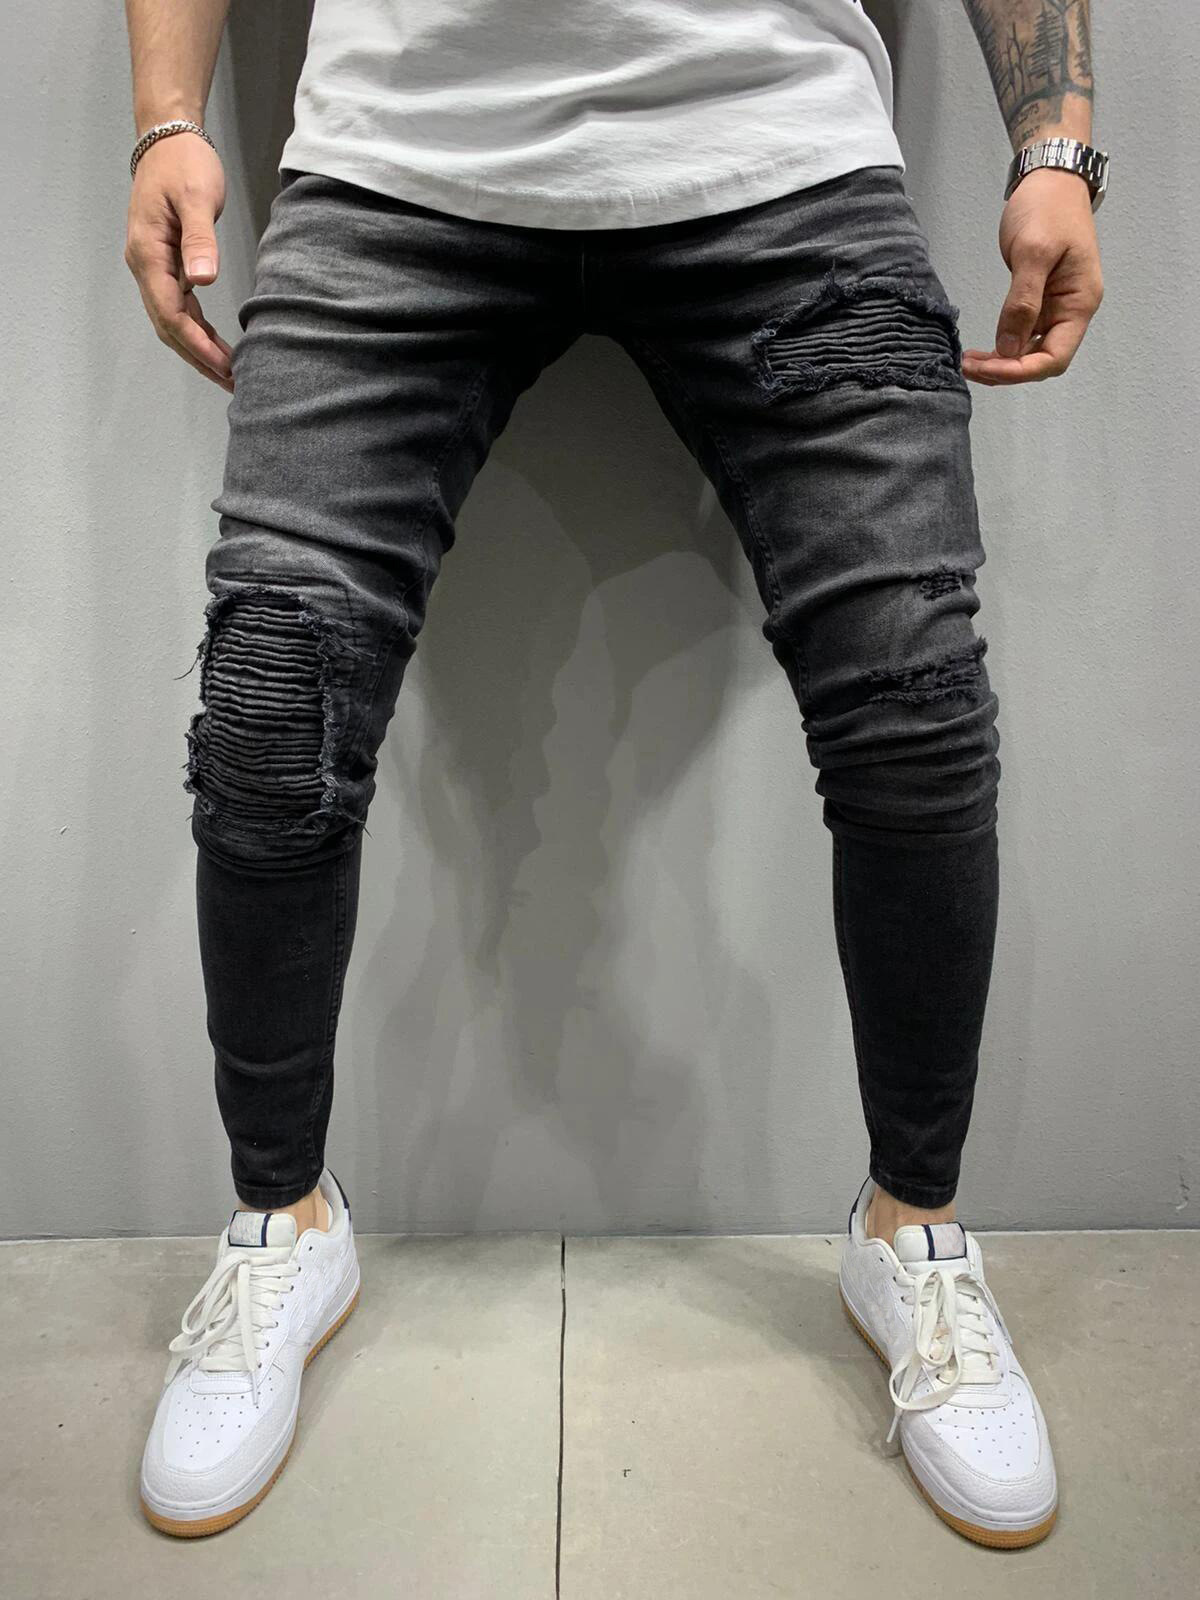   Cross-Border European and American Men's Motorcycle Jeans EBay Pleated Tight Stretch Skinny Jeans Amazon New